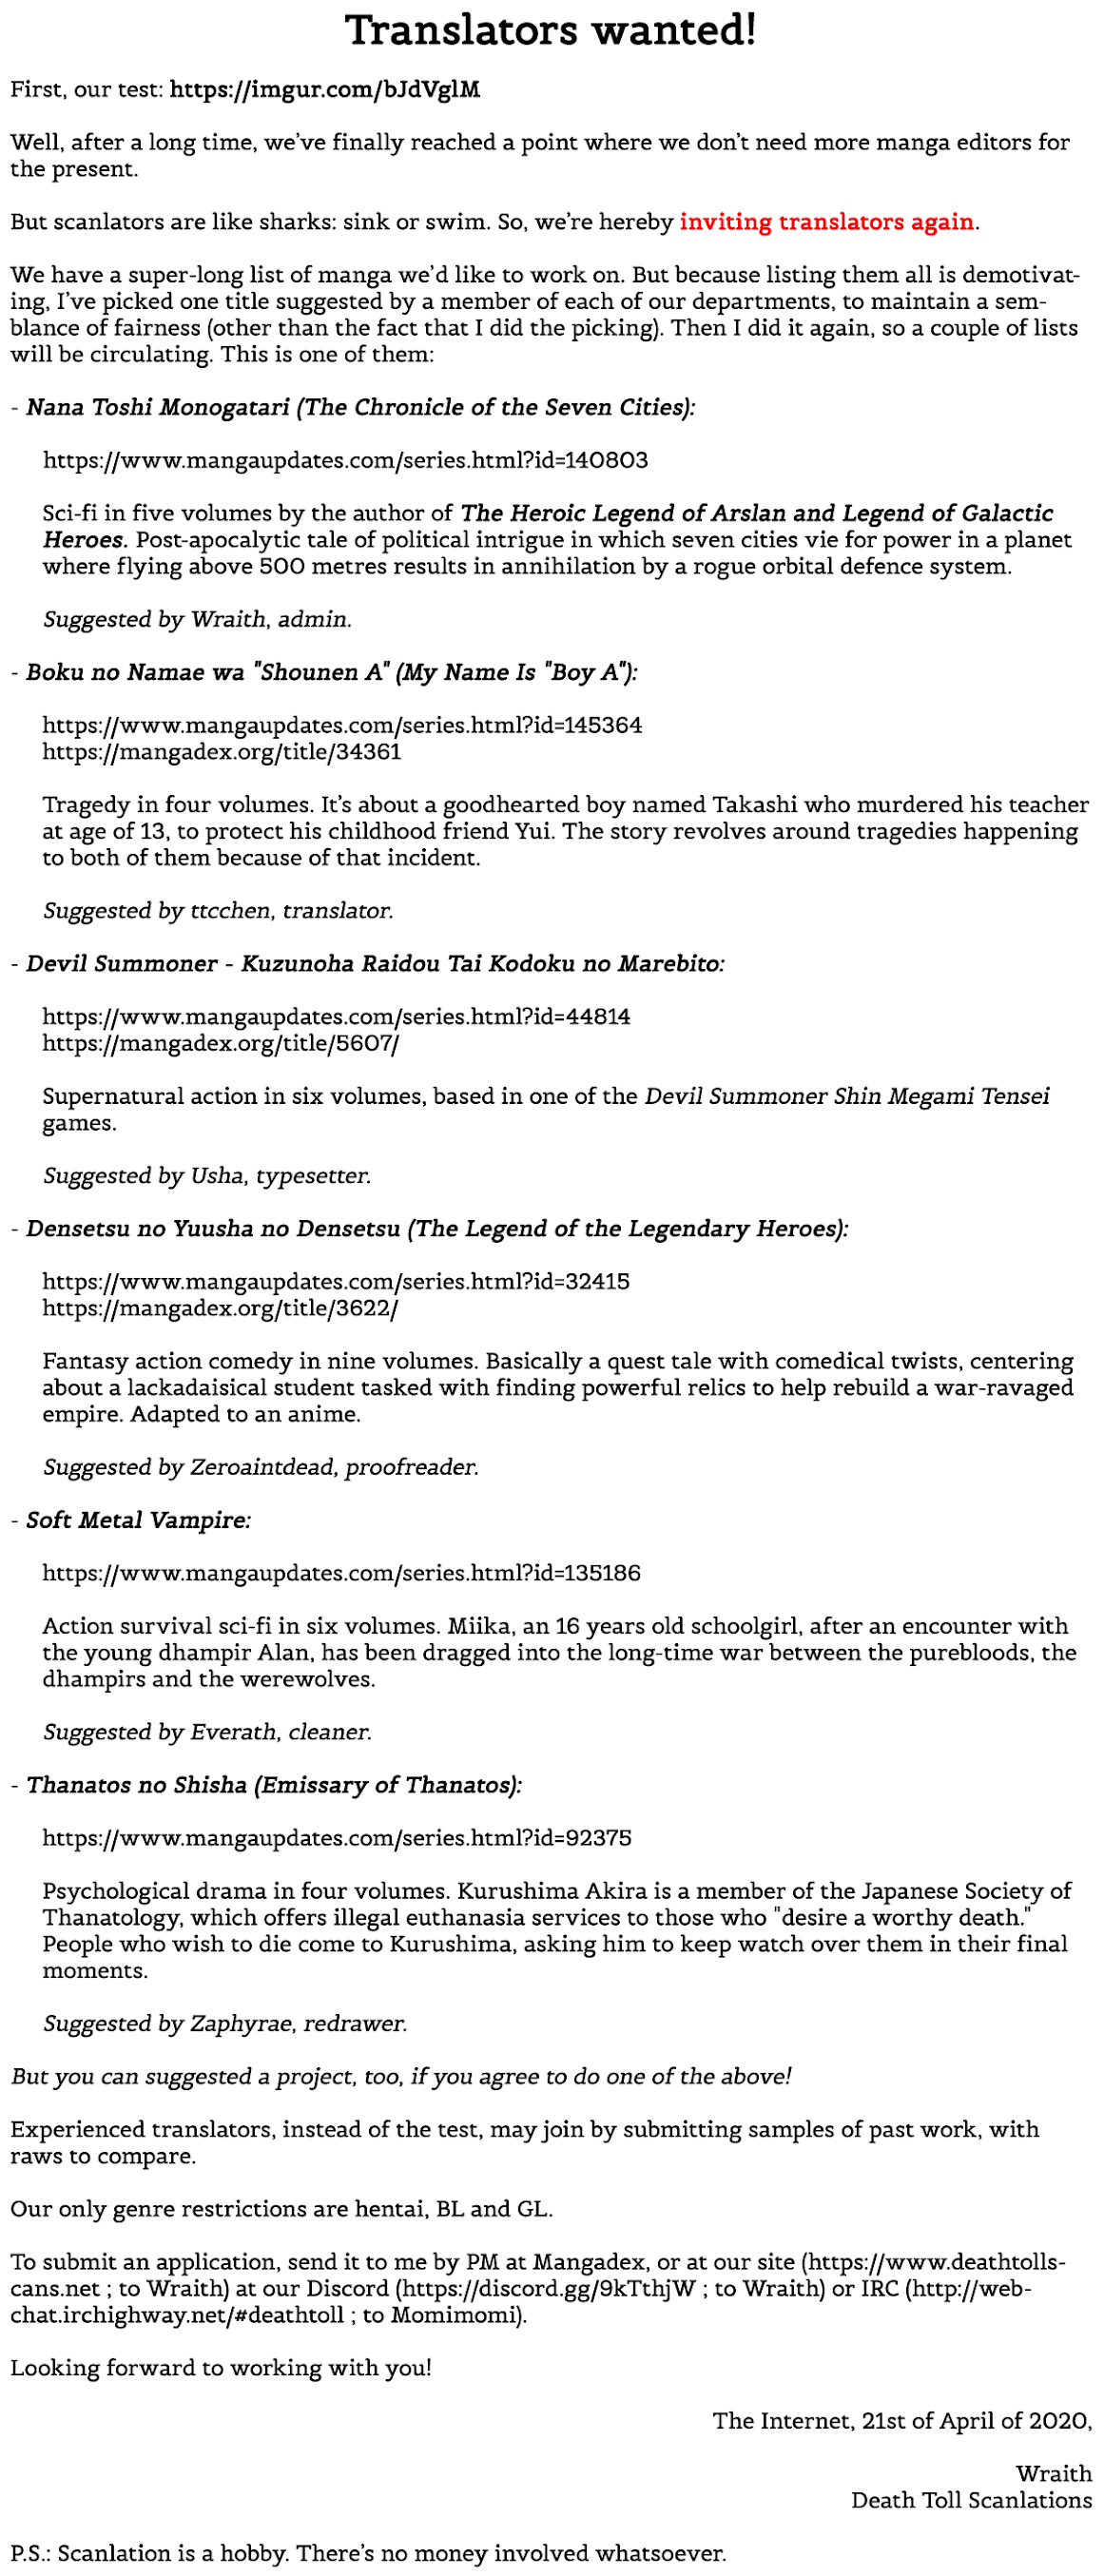 Task Force For Paranormal Disaster Management - Page 2